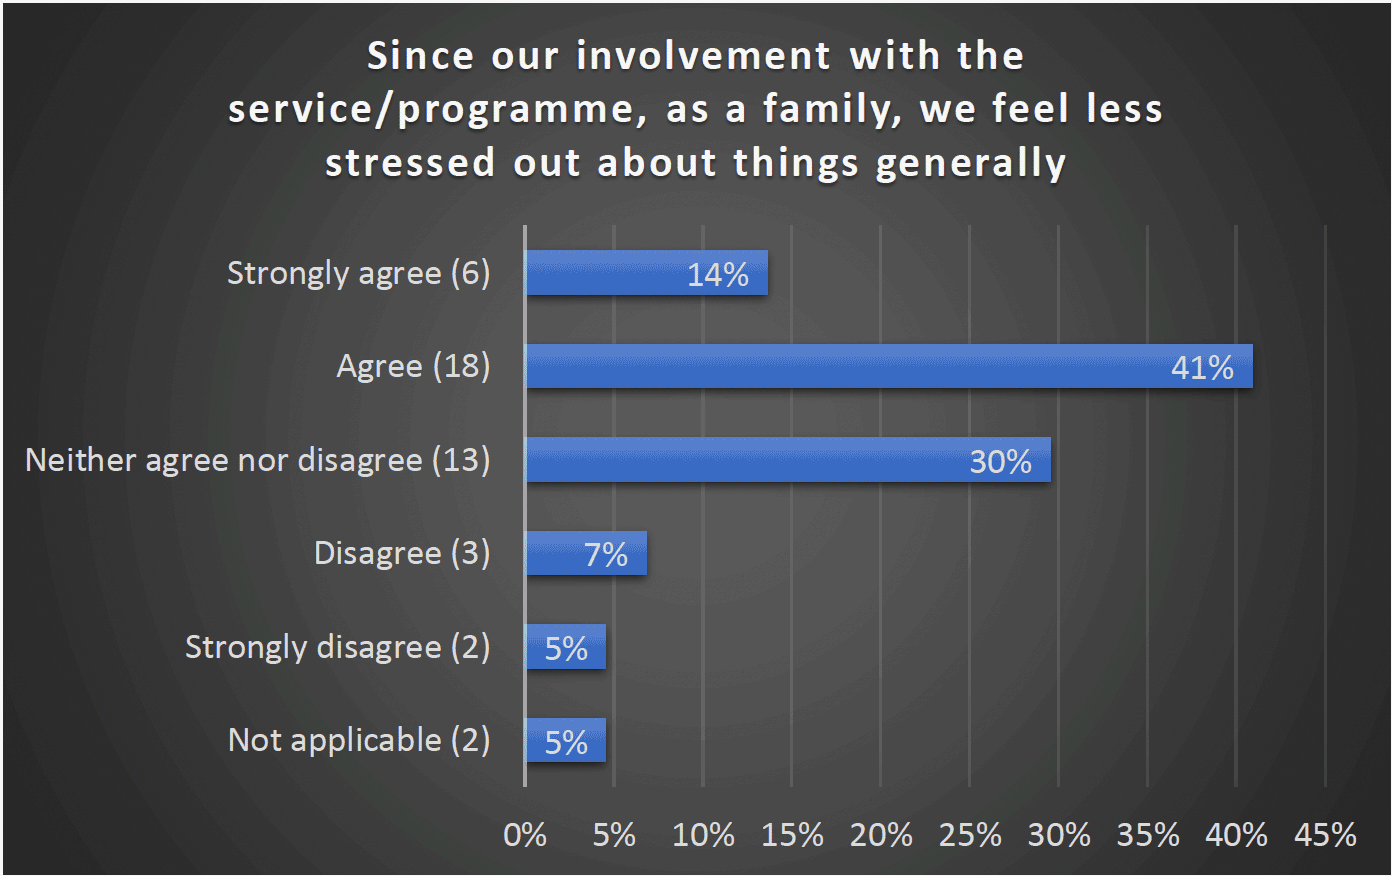 Since our involvement with the service/programme, as a family, we feel less stressed about things generally - Strongly agree (6) 14%, Agree (18) 41%, Neither agree nor disagree (13) 30, Disagree (3) 7%, Disagree (3) Strongly disagree (2) 5%, Not applicable (2) 5%